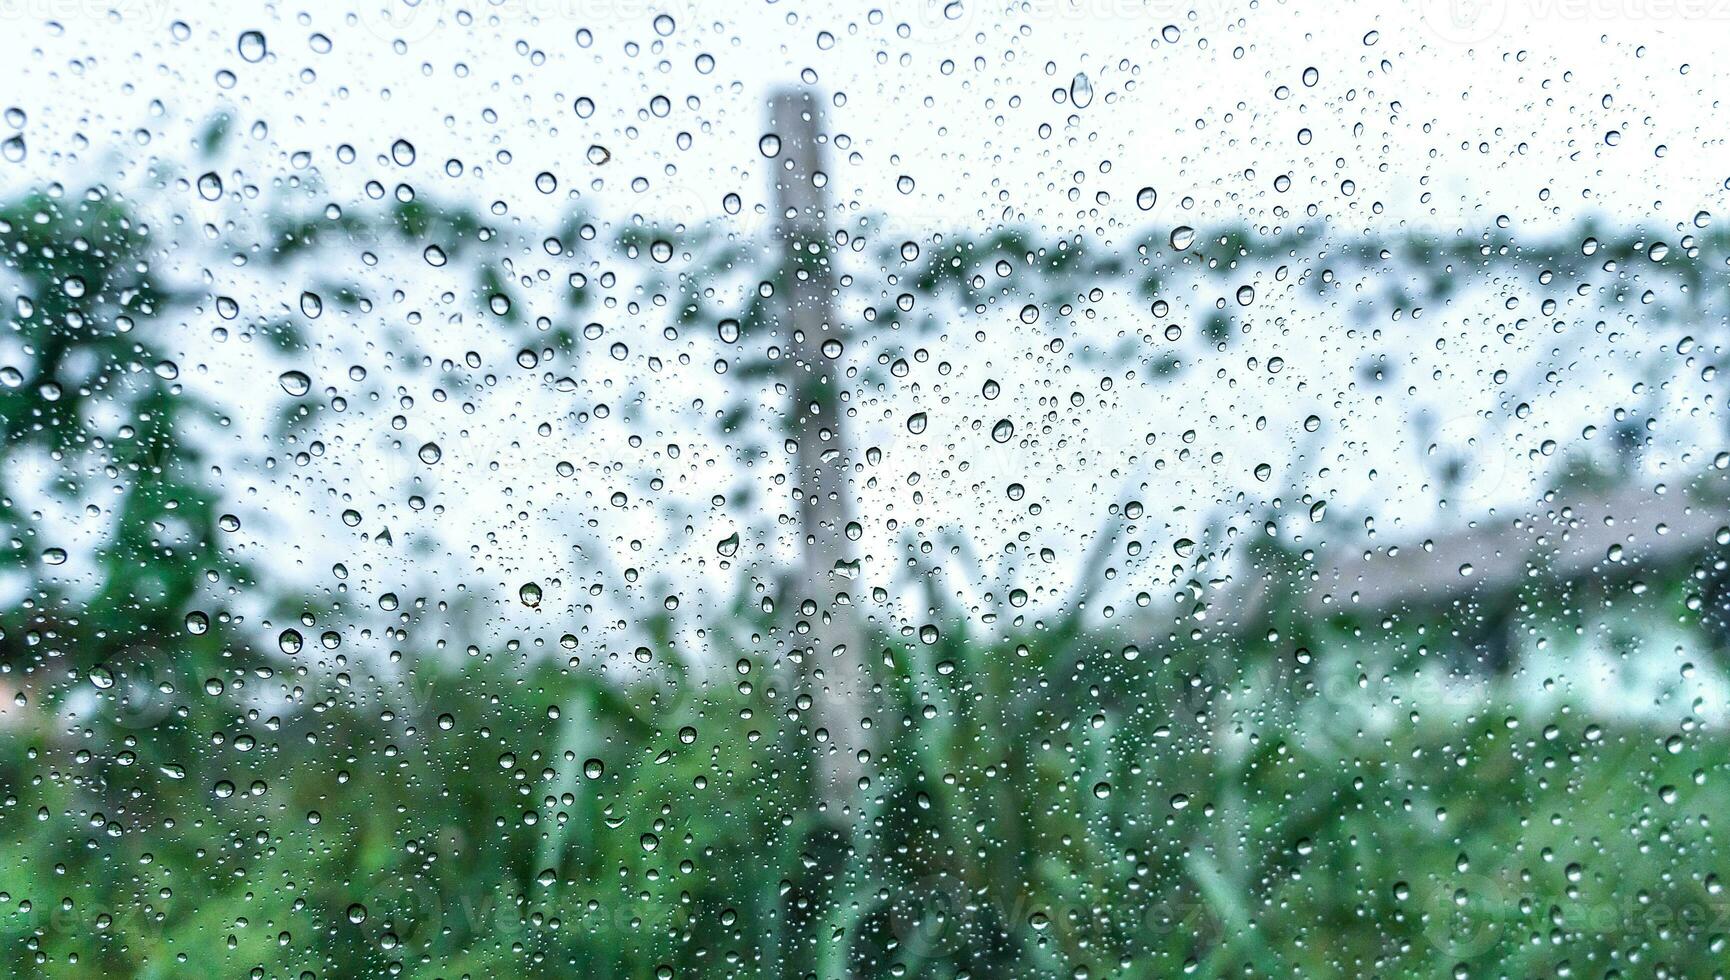 Rain droplets on surface of car glass with blurred green nature background and flowers through window glass of the car covered by raindrops. Freshness after rain. Wet windscreen shot from inside car. photo